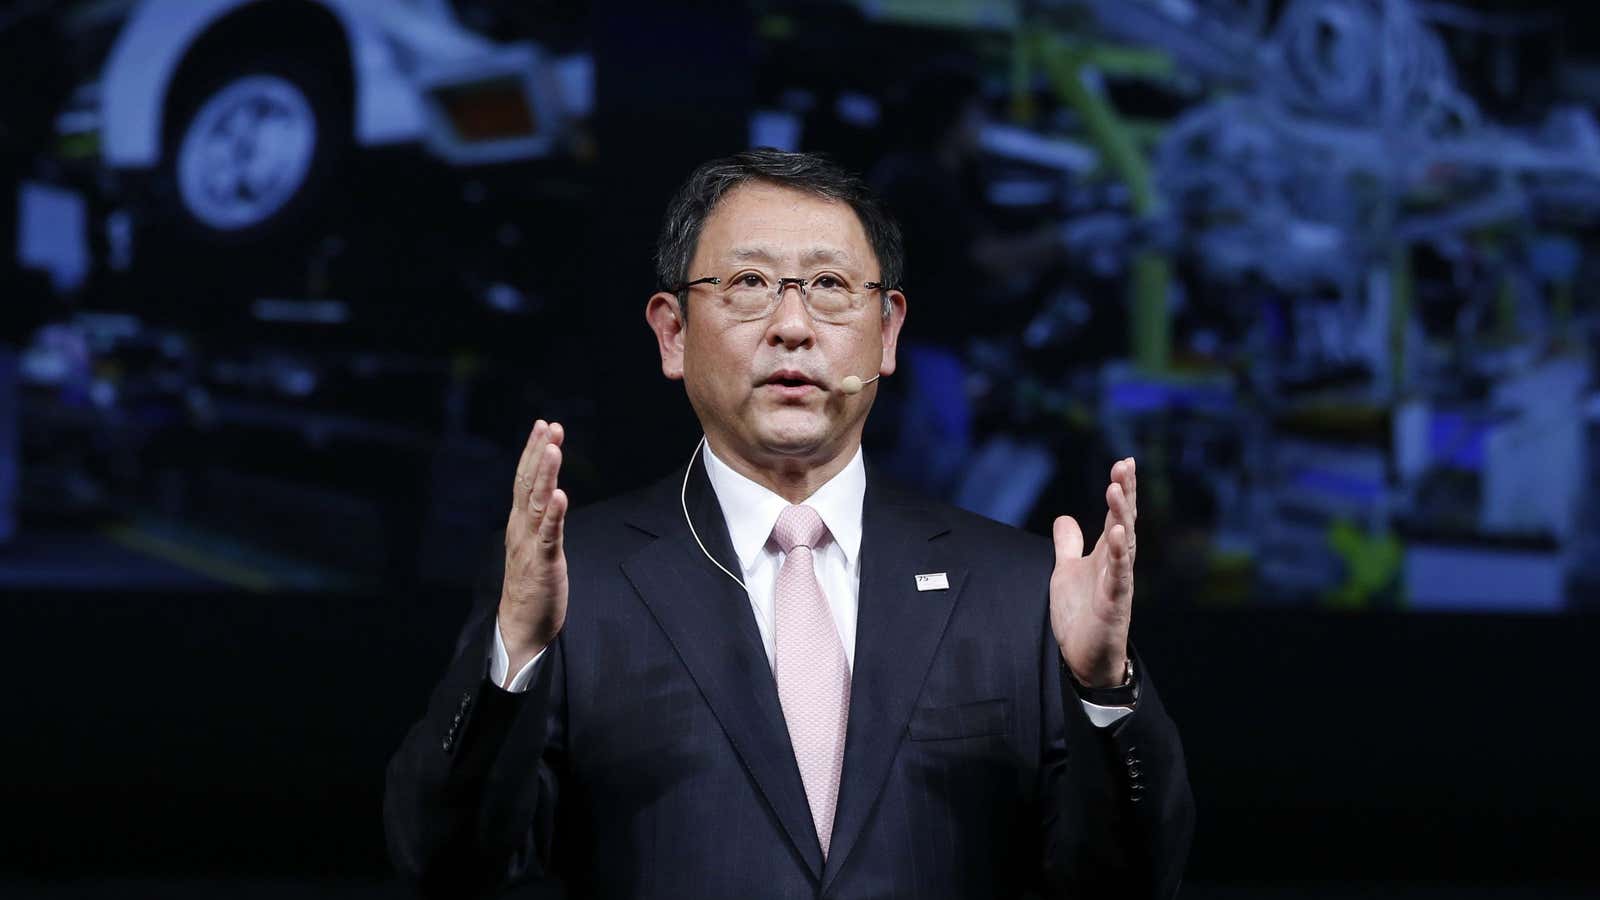 Toyota President Akio Toyoda attempts to show the approximate size of the wage increase.